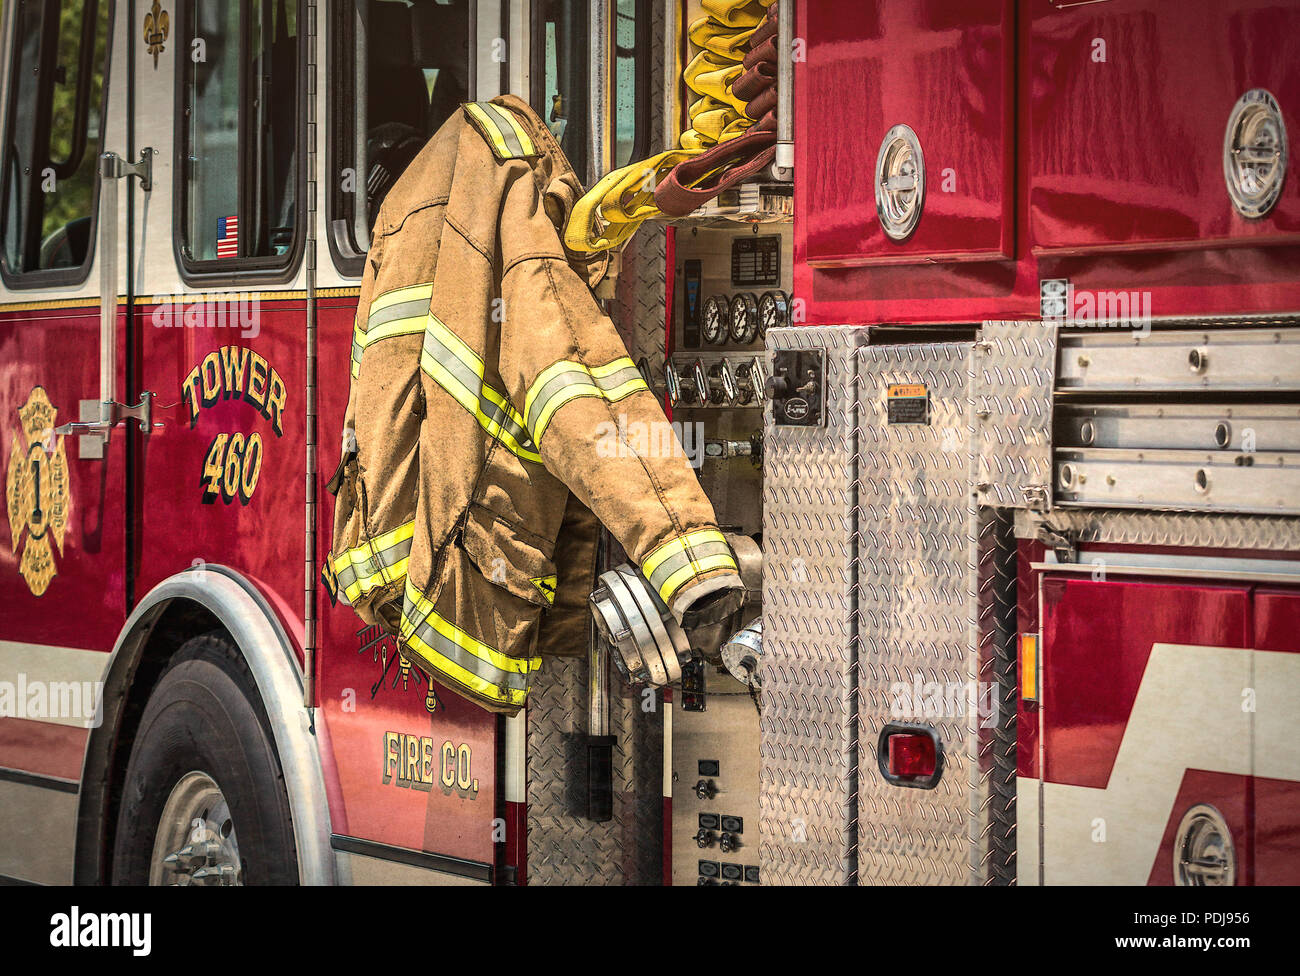 Hero at work-Firefighter Gear hanging on the side of a fire engine. Stock Photo